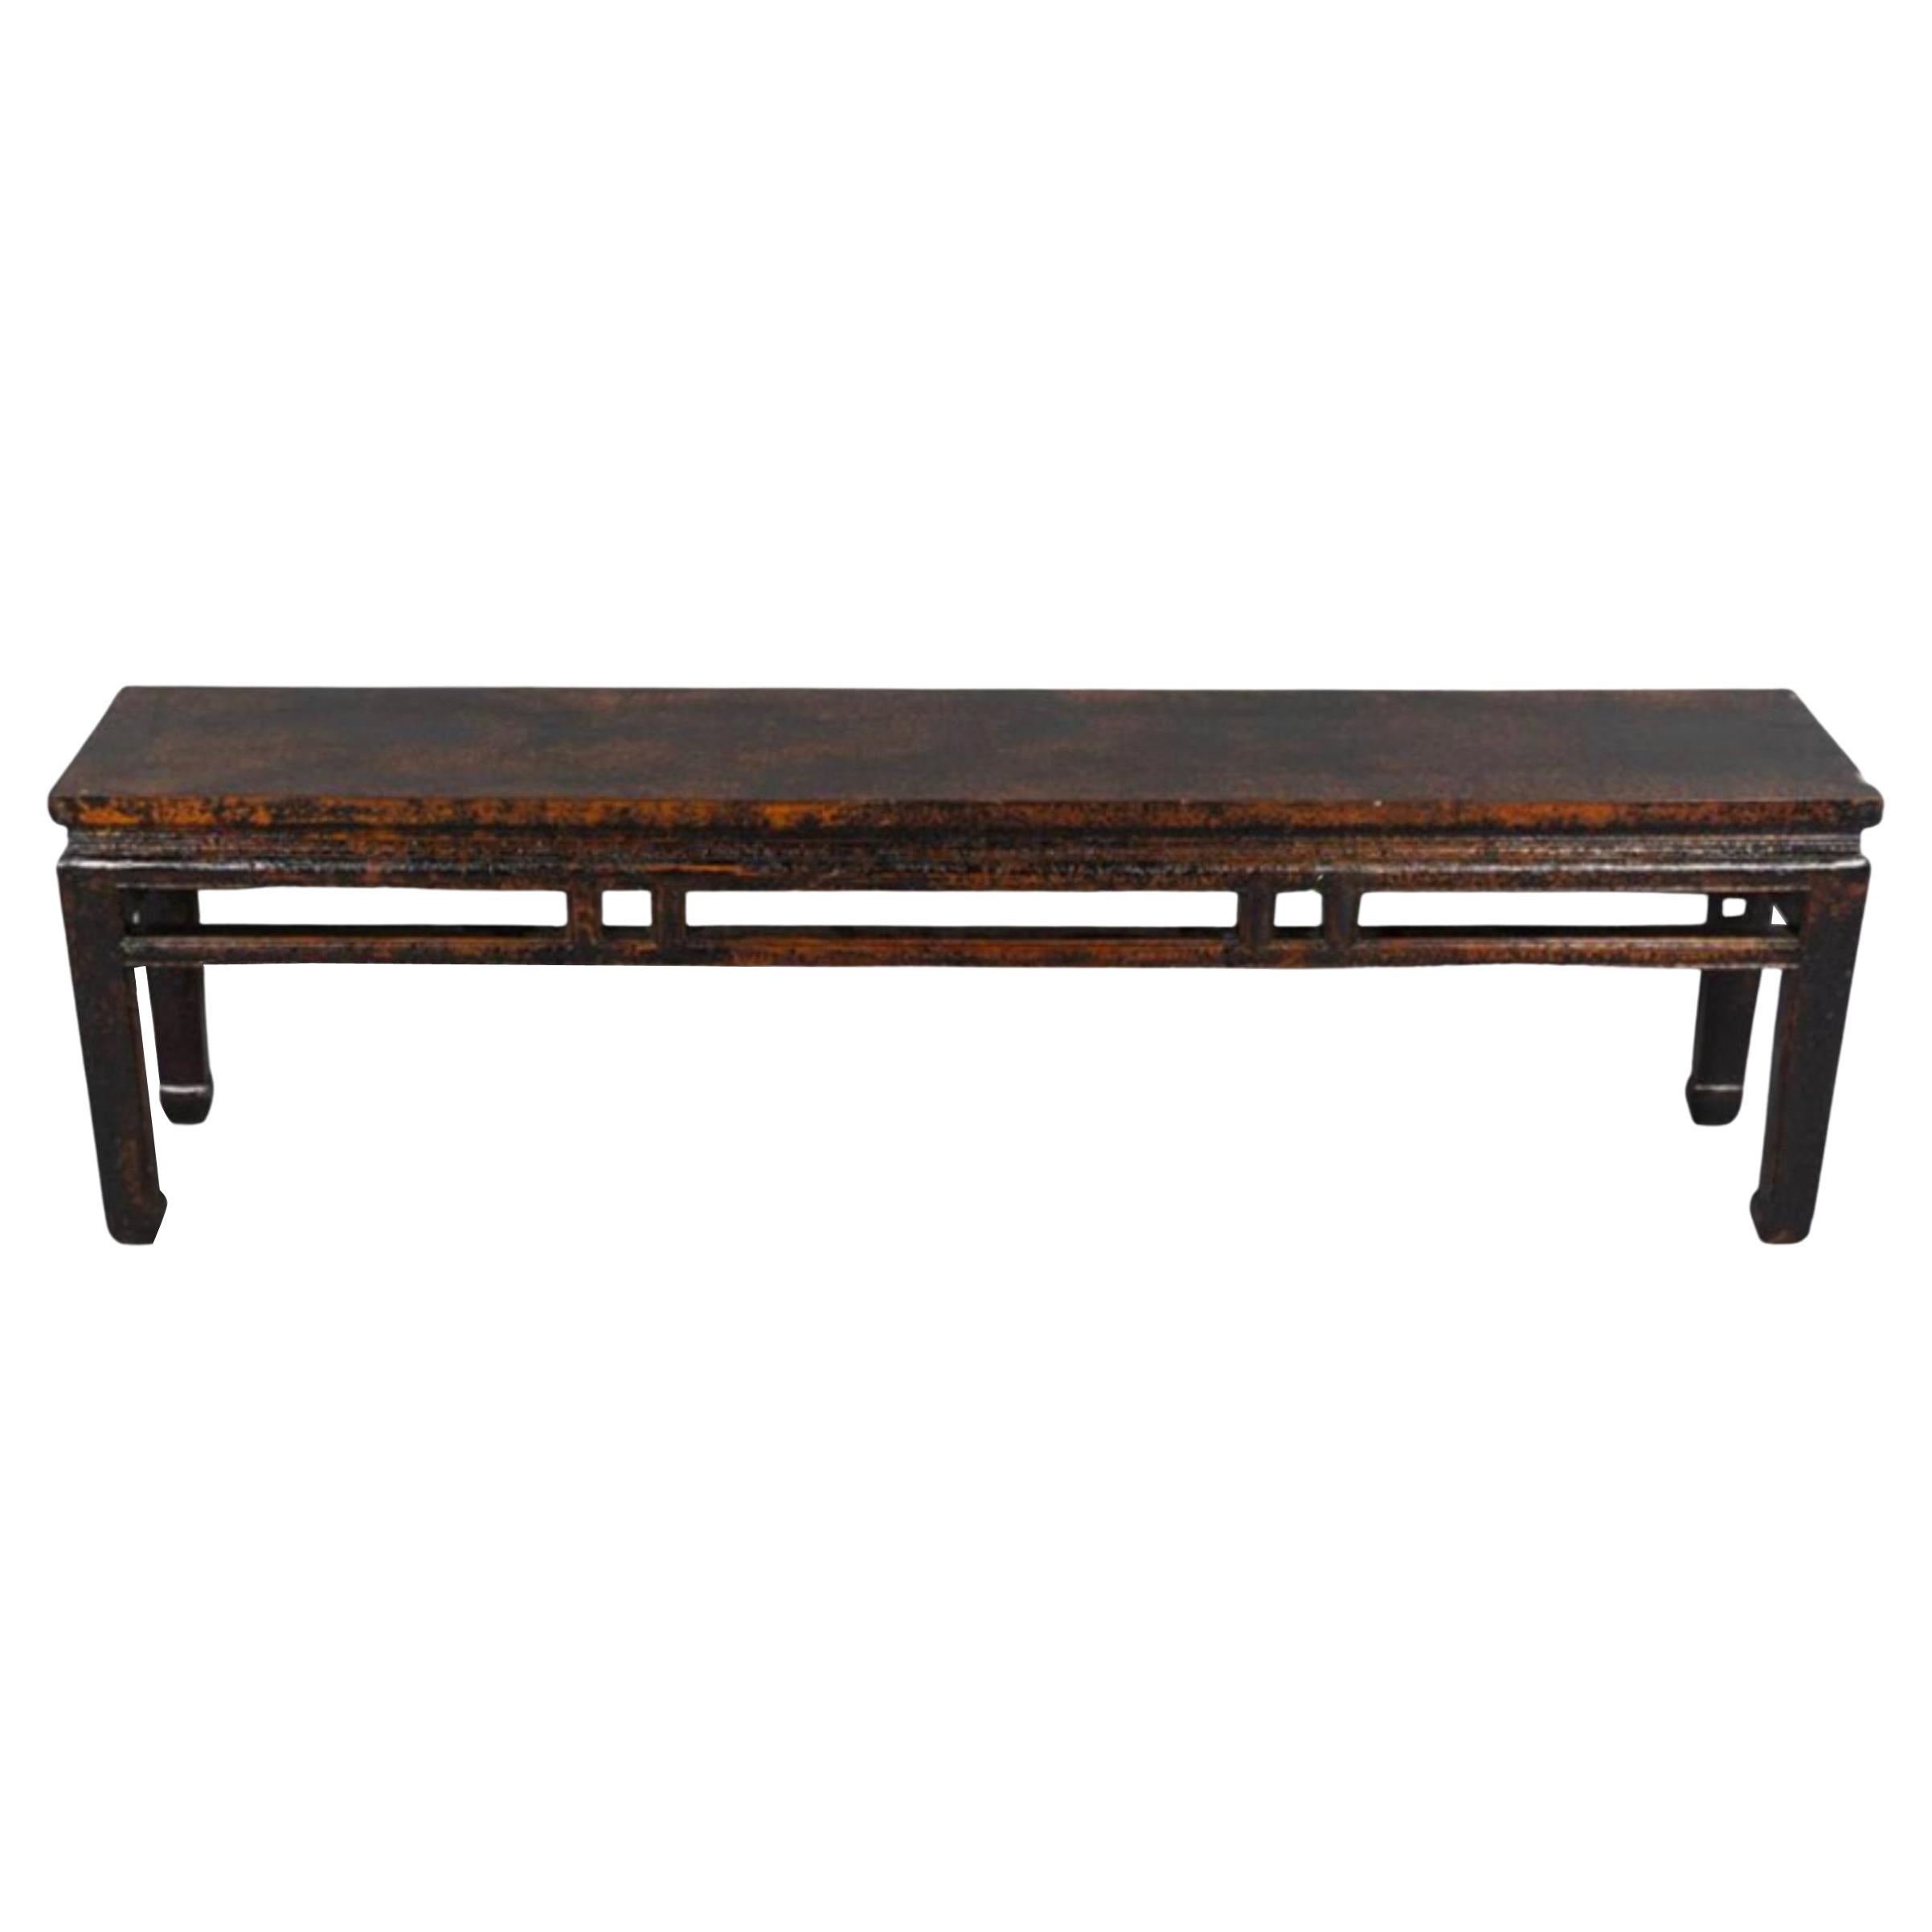 Mid-18th Century Chinoiserie Textured Lacquer Wood Long Bench